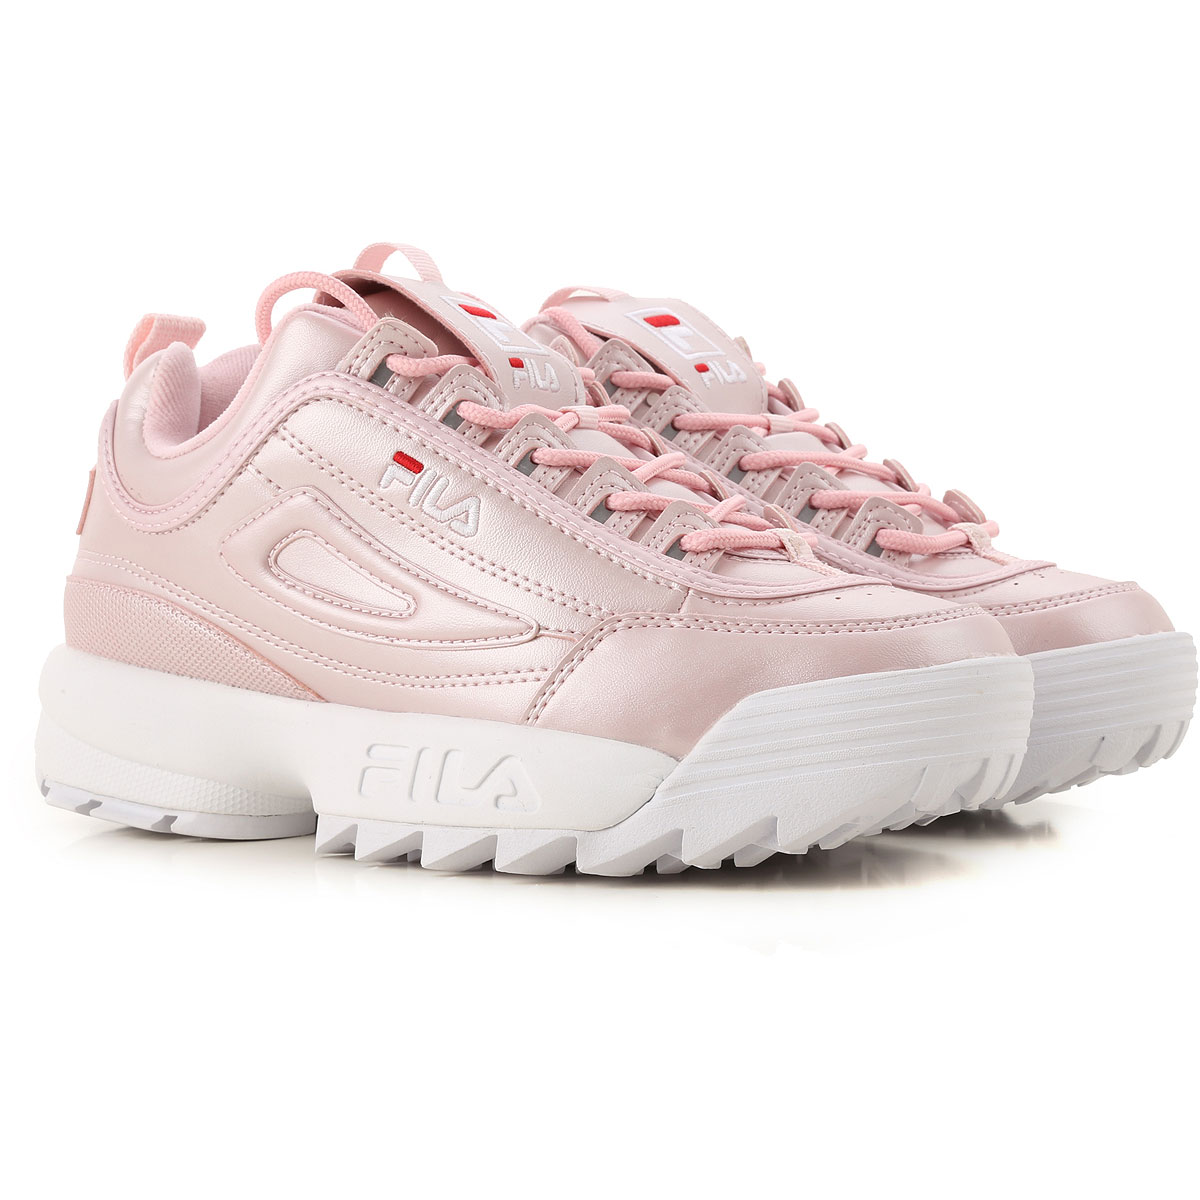 Womens Shoes Fila , Style code: 1010608-71d-